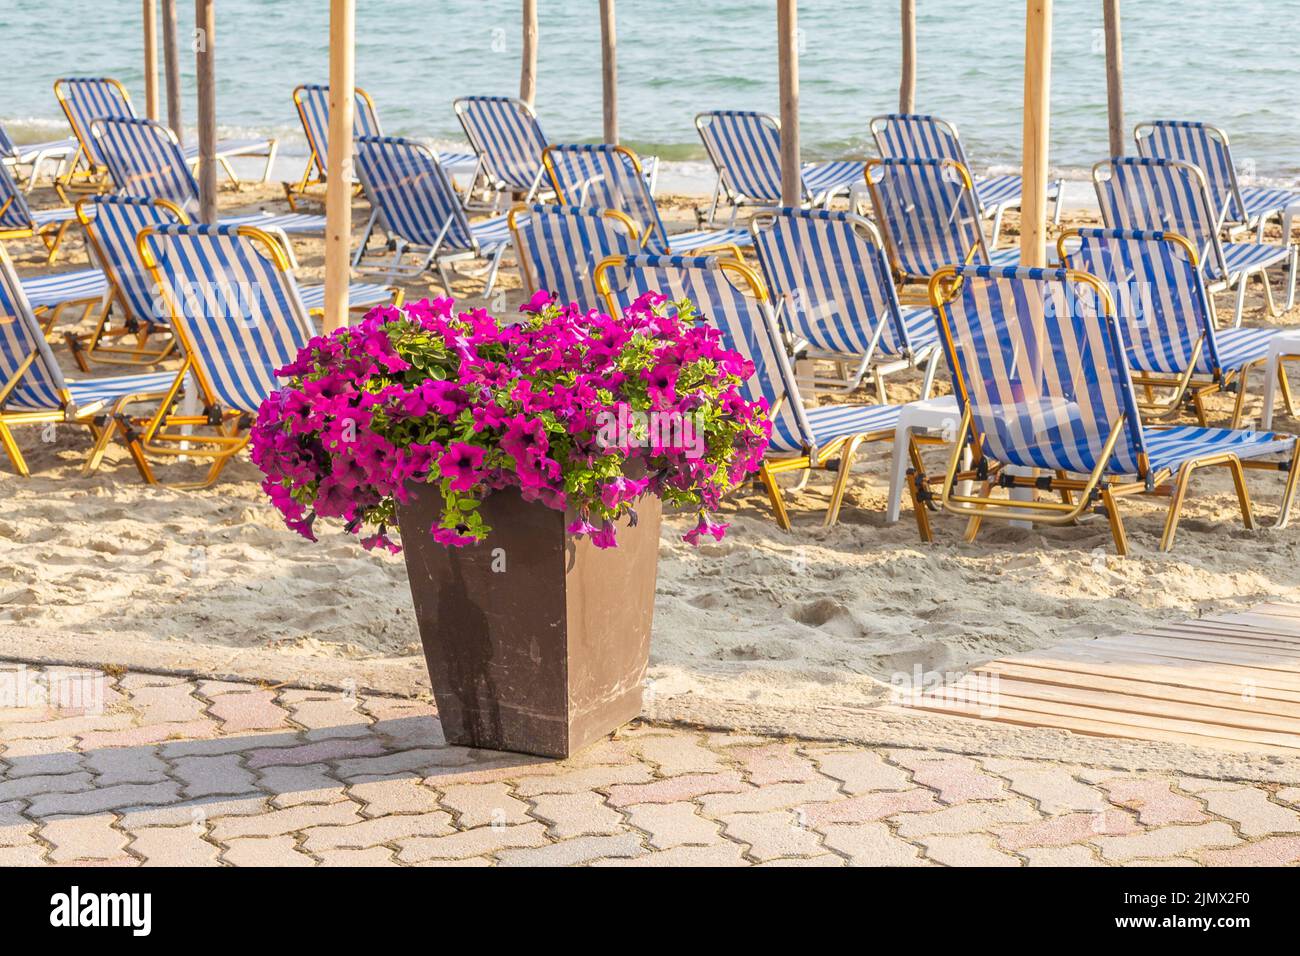 Sandy beach with umbrellas and sunbeds by the sea and flowers. Stock Photo